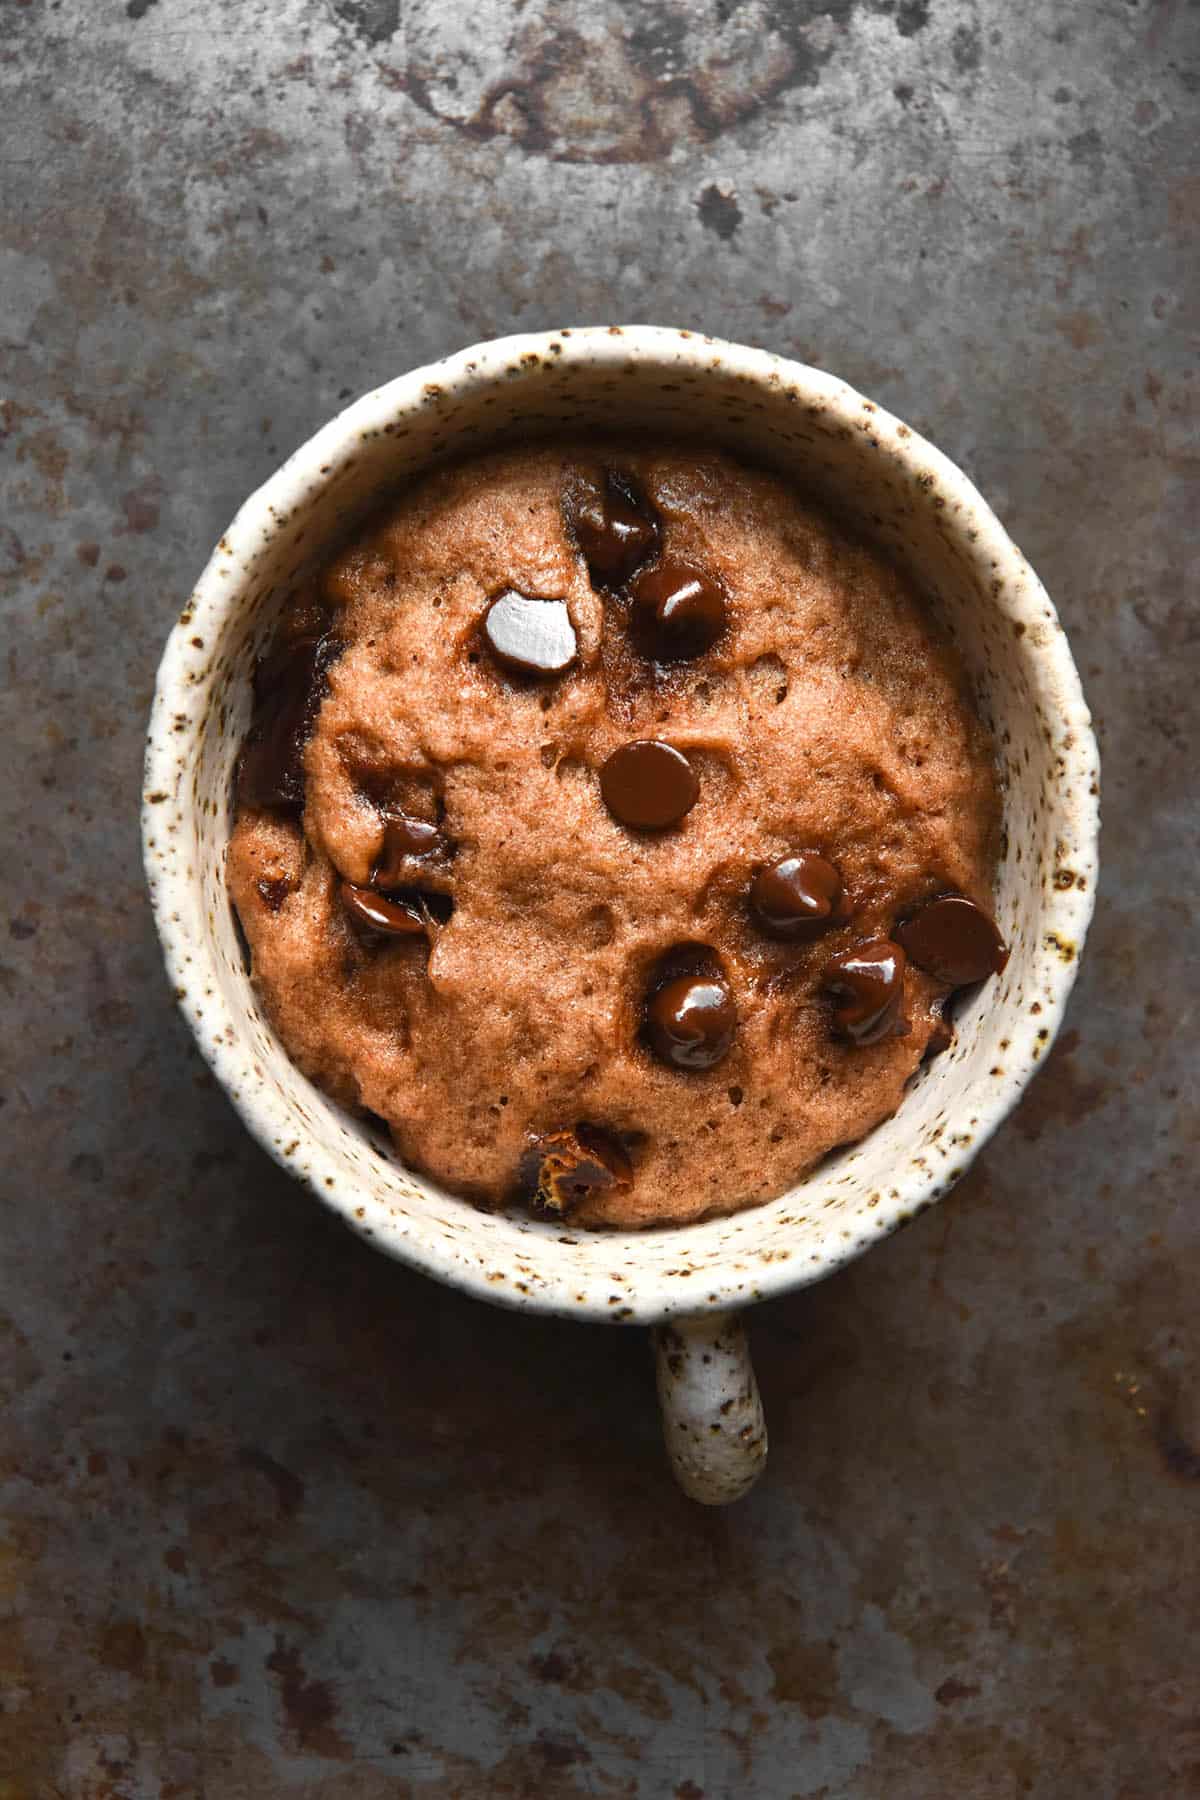 An aerial image of a gluten free microwave hot cross bun topped with chocolate chips. The bun sits in a white speckled ceramic mug atop a dark steel backdrop